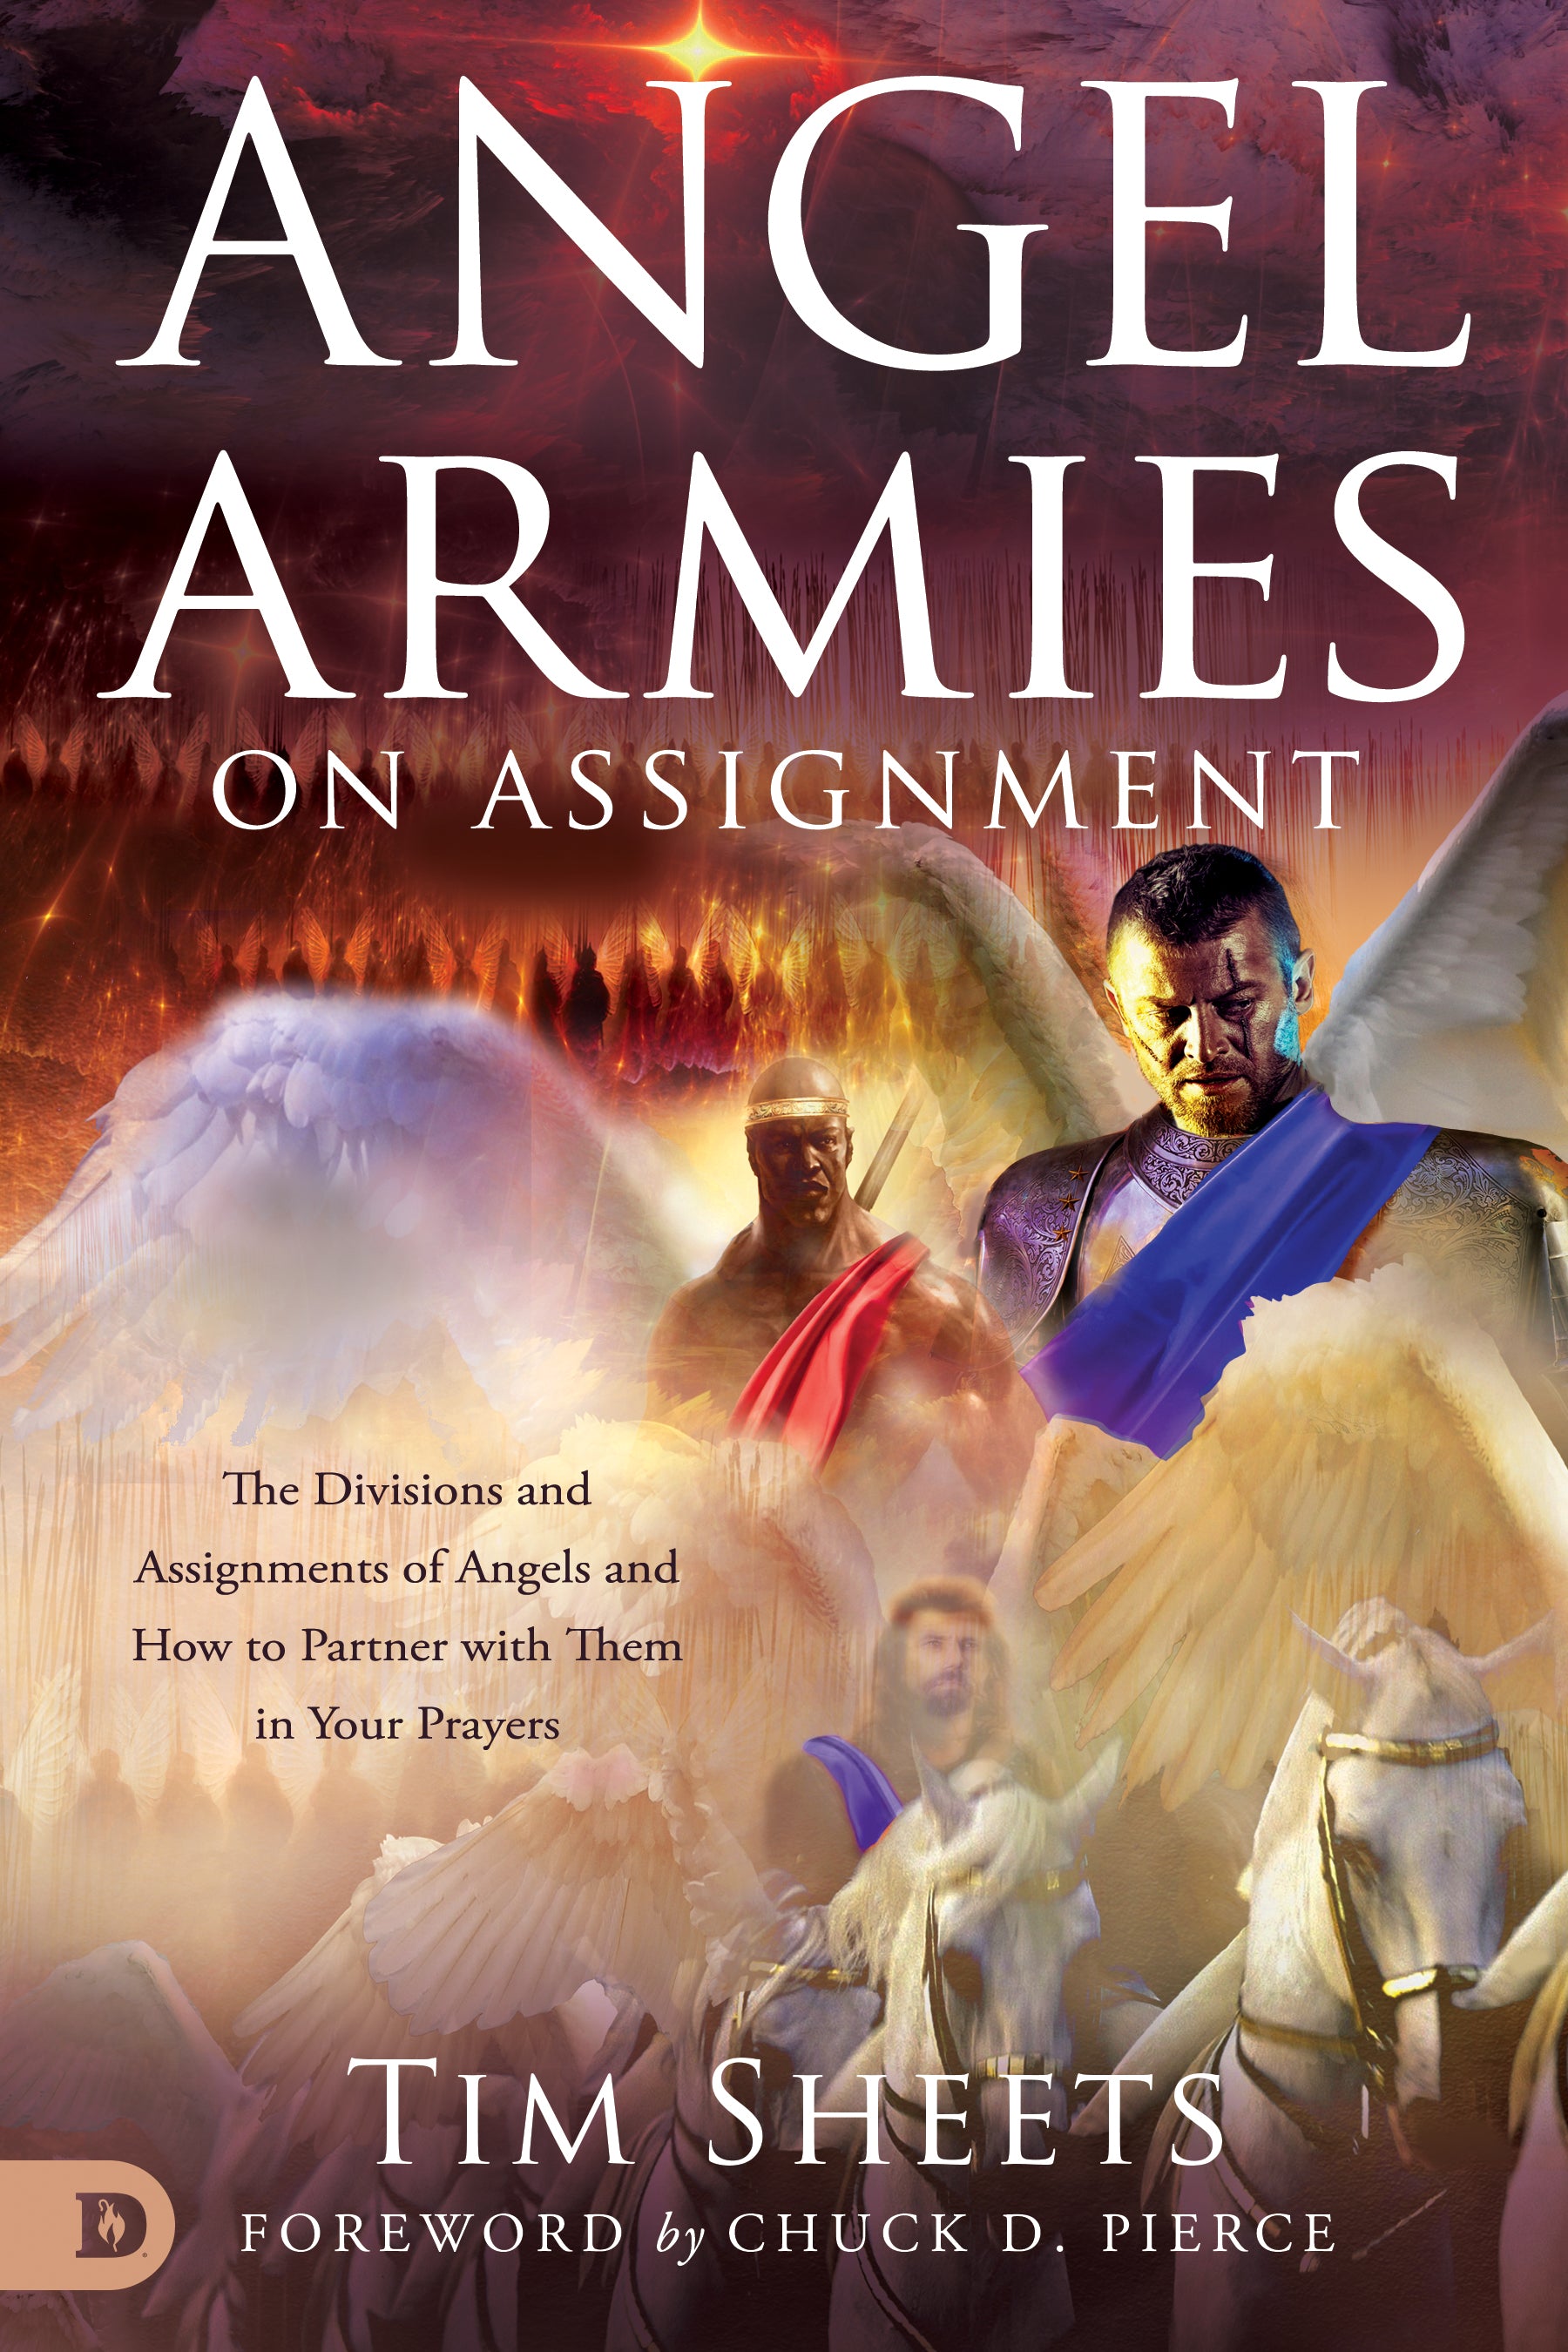 angel armies on assignment by tim sheets